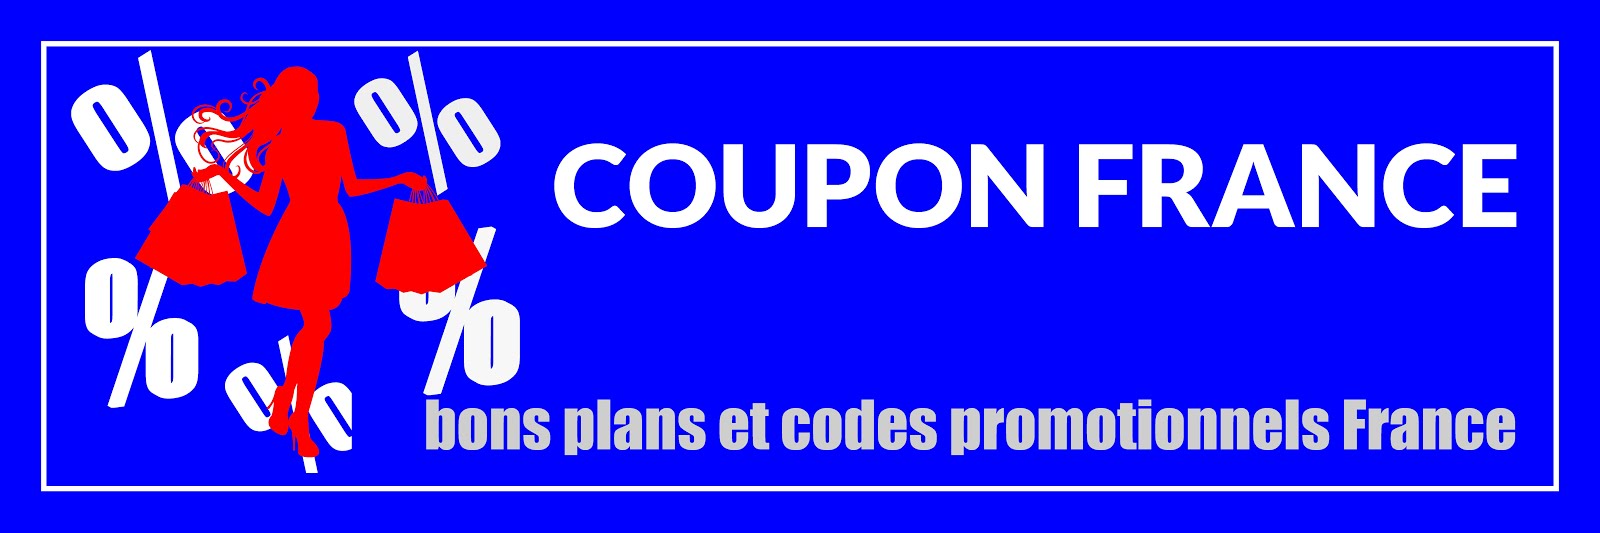 Coupons France